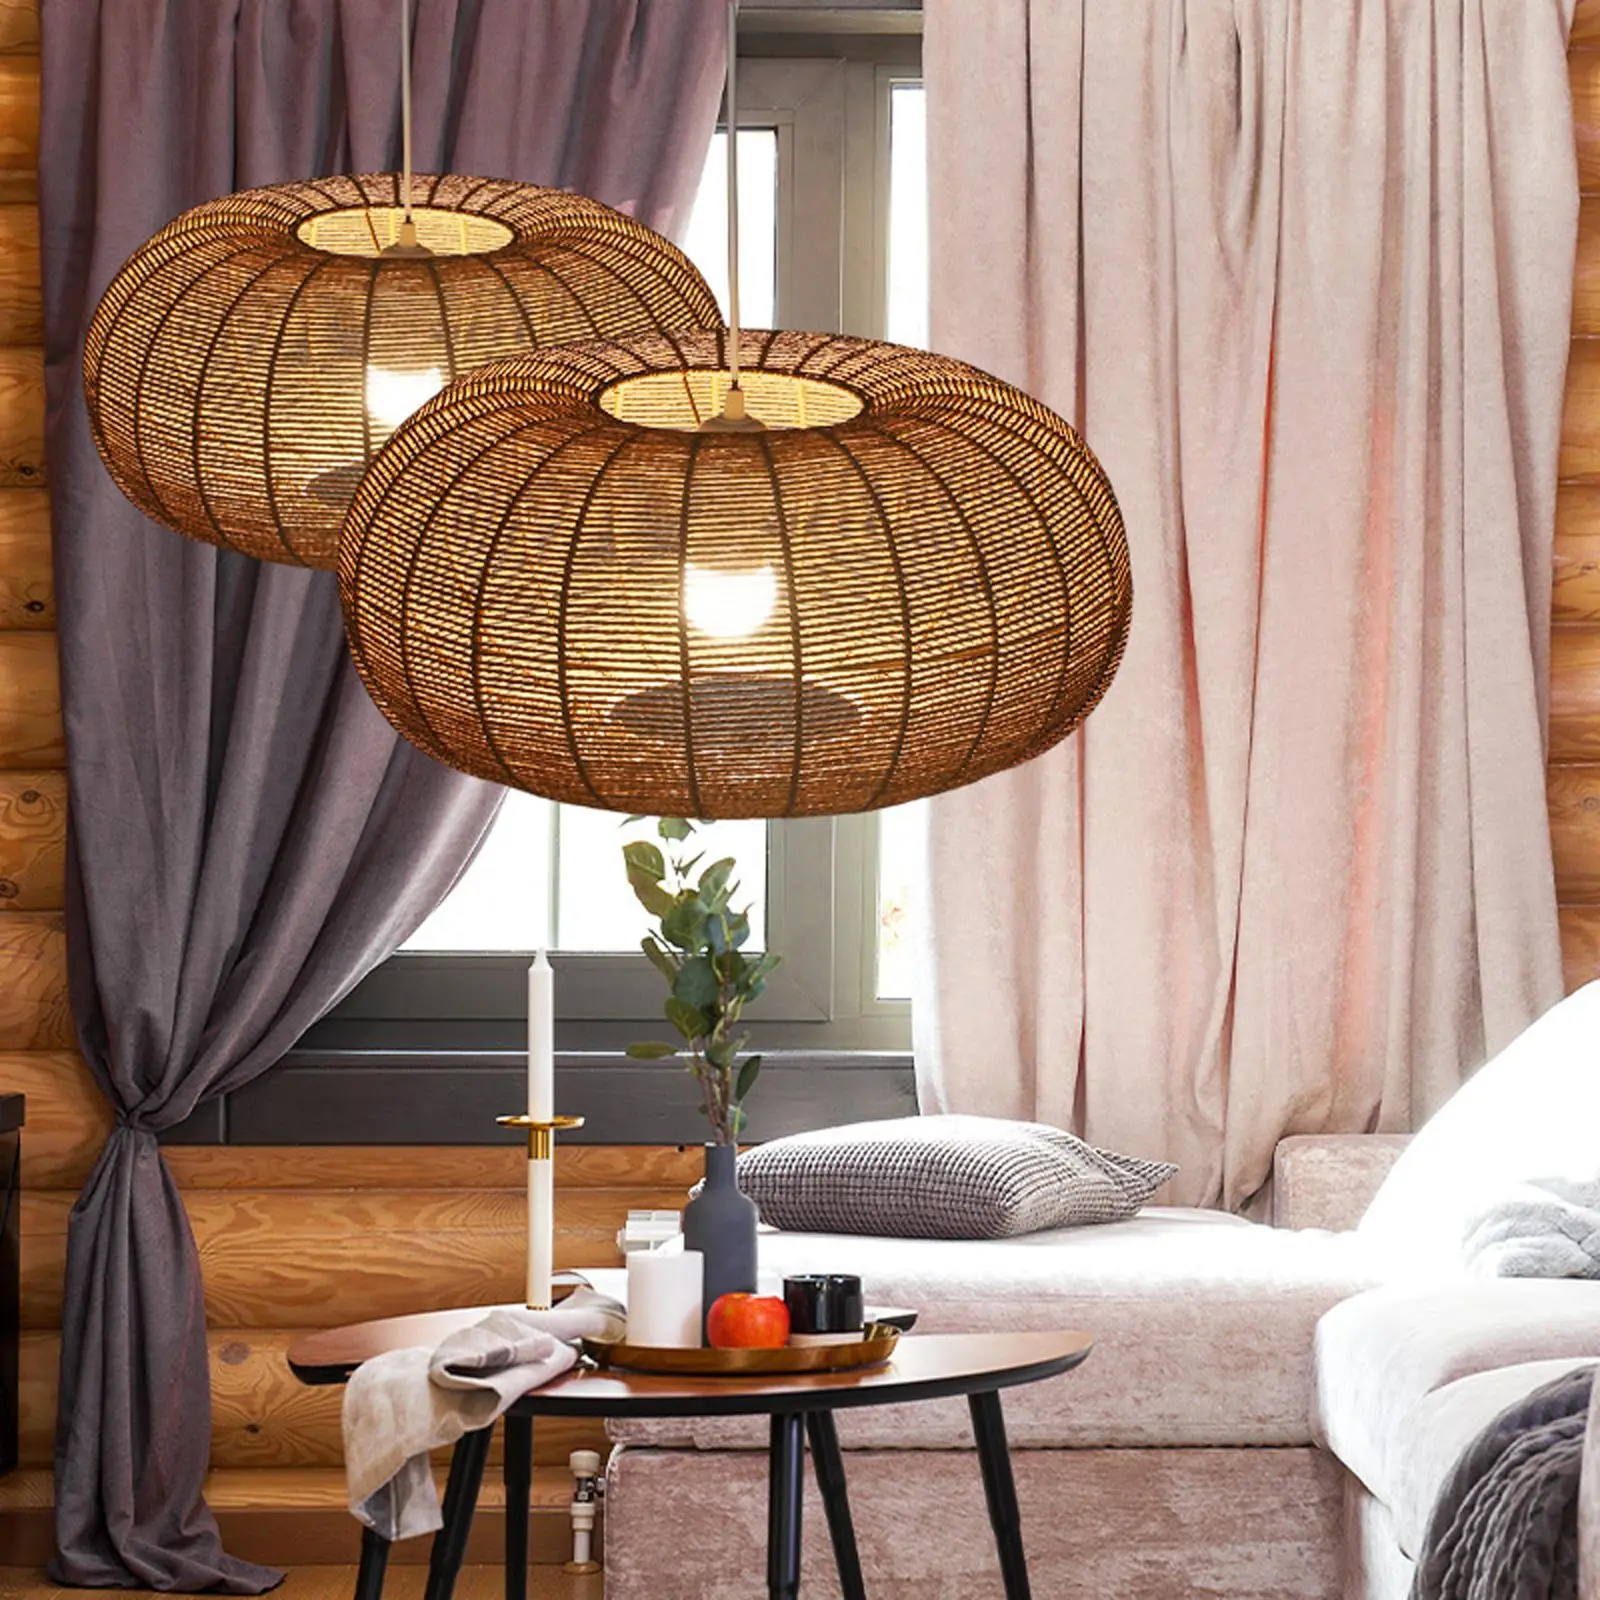 Nordic Style Pendant Lamp Shade, Decoration Rope Ceiling Light Shade Woven Chandelier Cover for Dining Room Kitchen restaurant